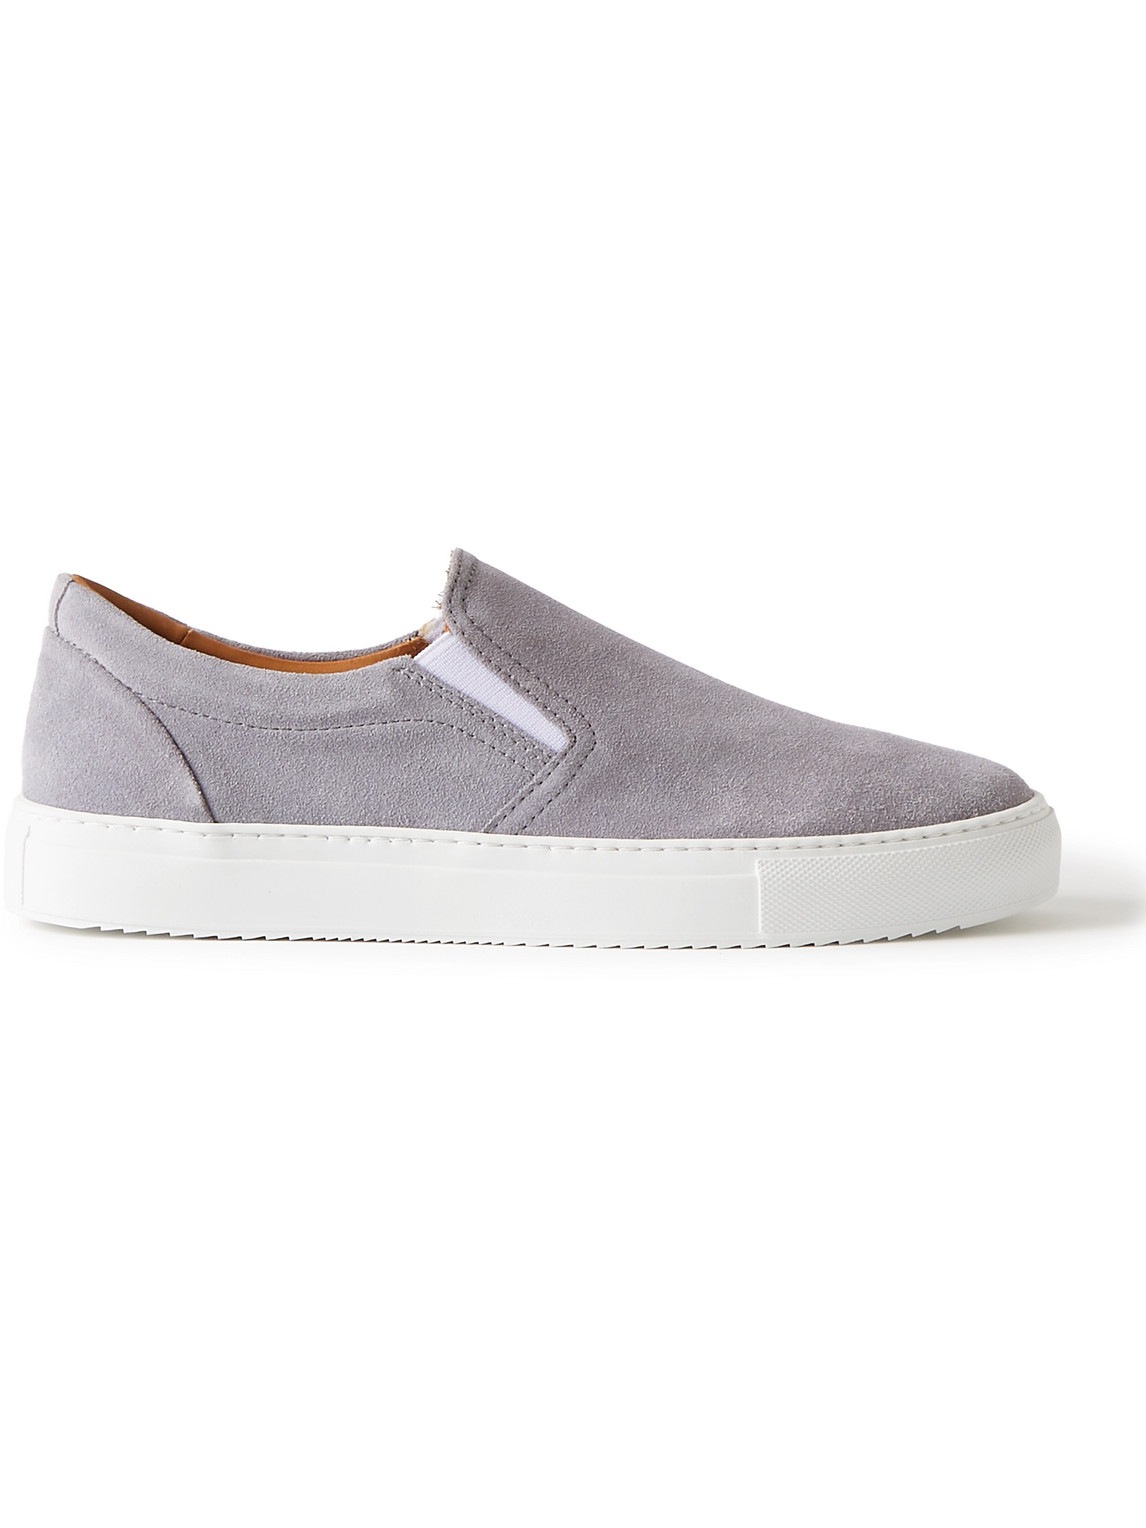 Mr P. Regenerated Suede By Evolo® Slip-on Sneakers In Gray